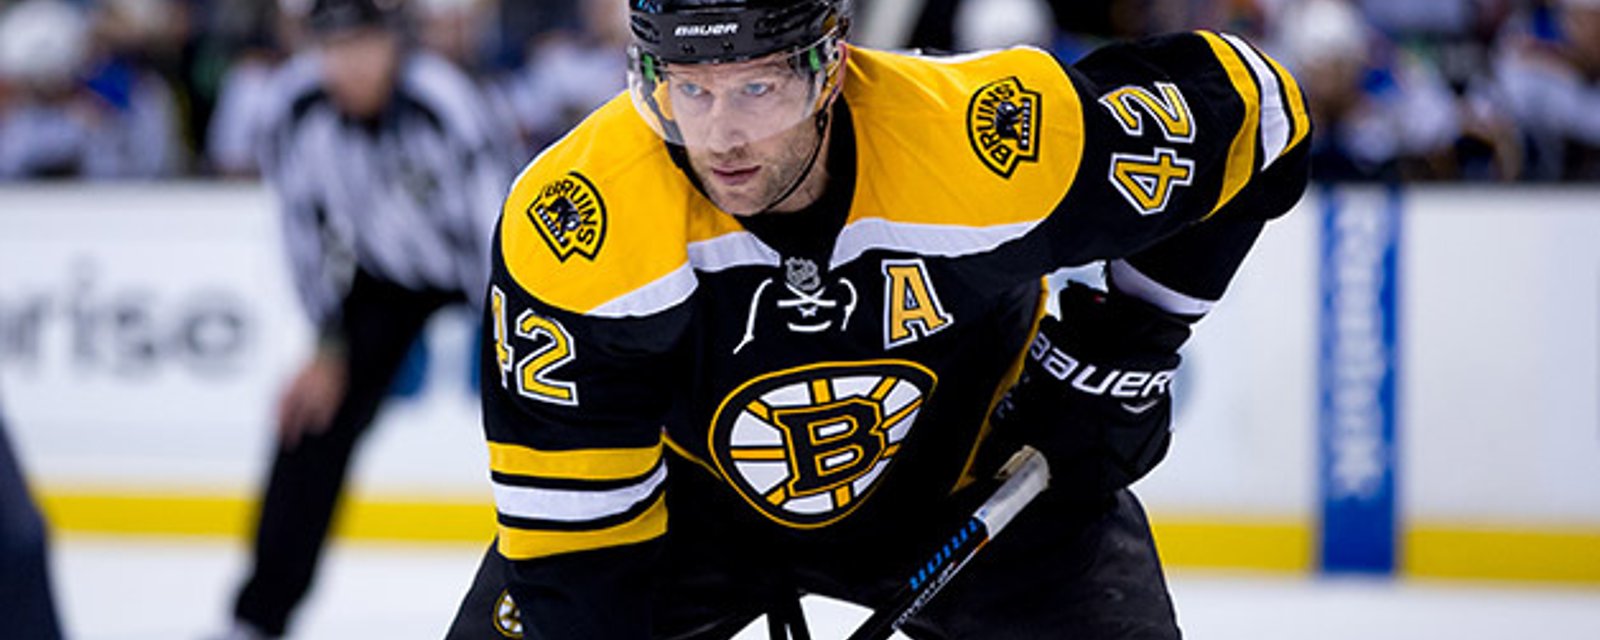 Breaking: Bruins' Backes and his $6 M salary are healthy scratches tonight! 